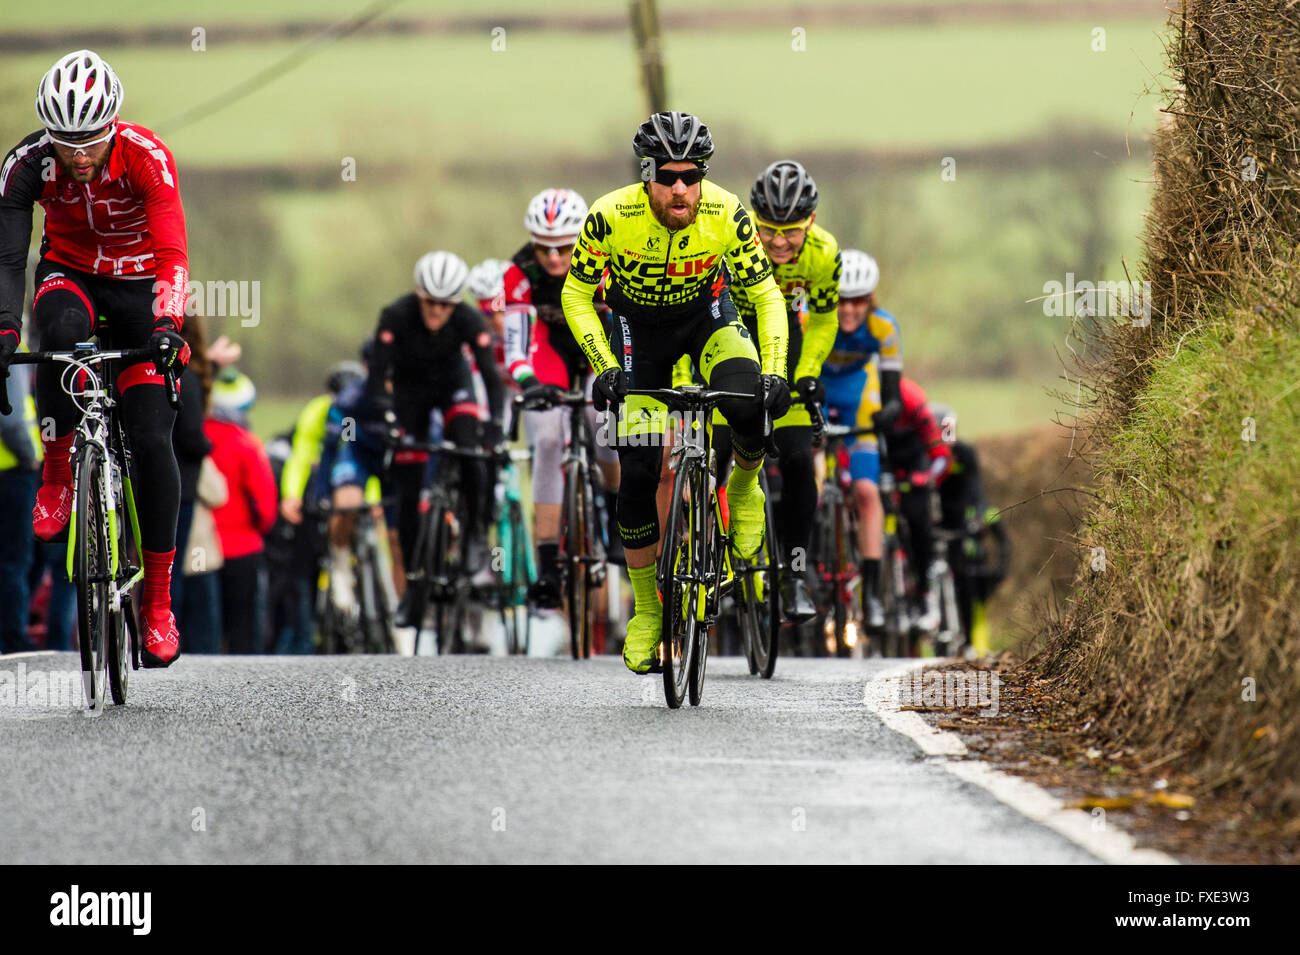 Cyclists competing in the annual 'The Tour of the Mining Valleys' cycling road race on the narrow country roads near Aberystwyth, Ceredigion Wales UK Stock Photo